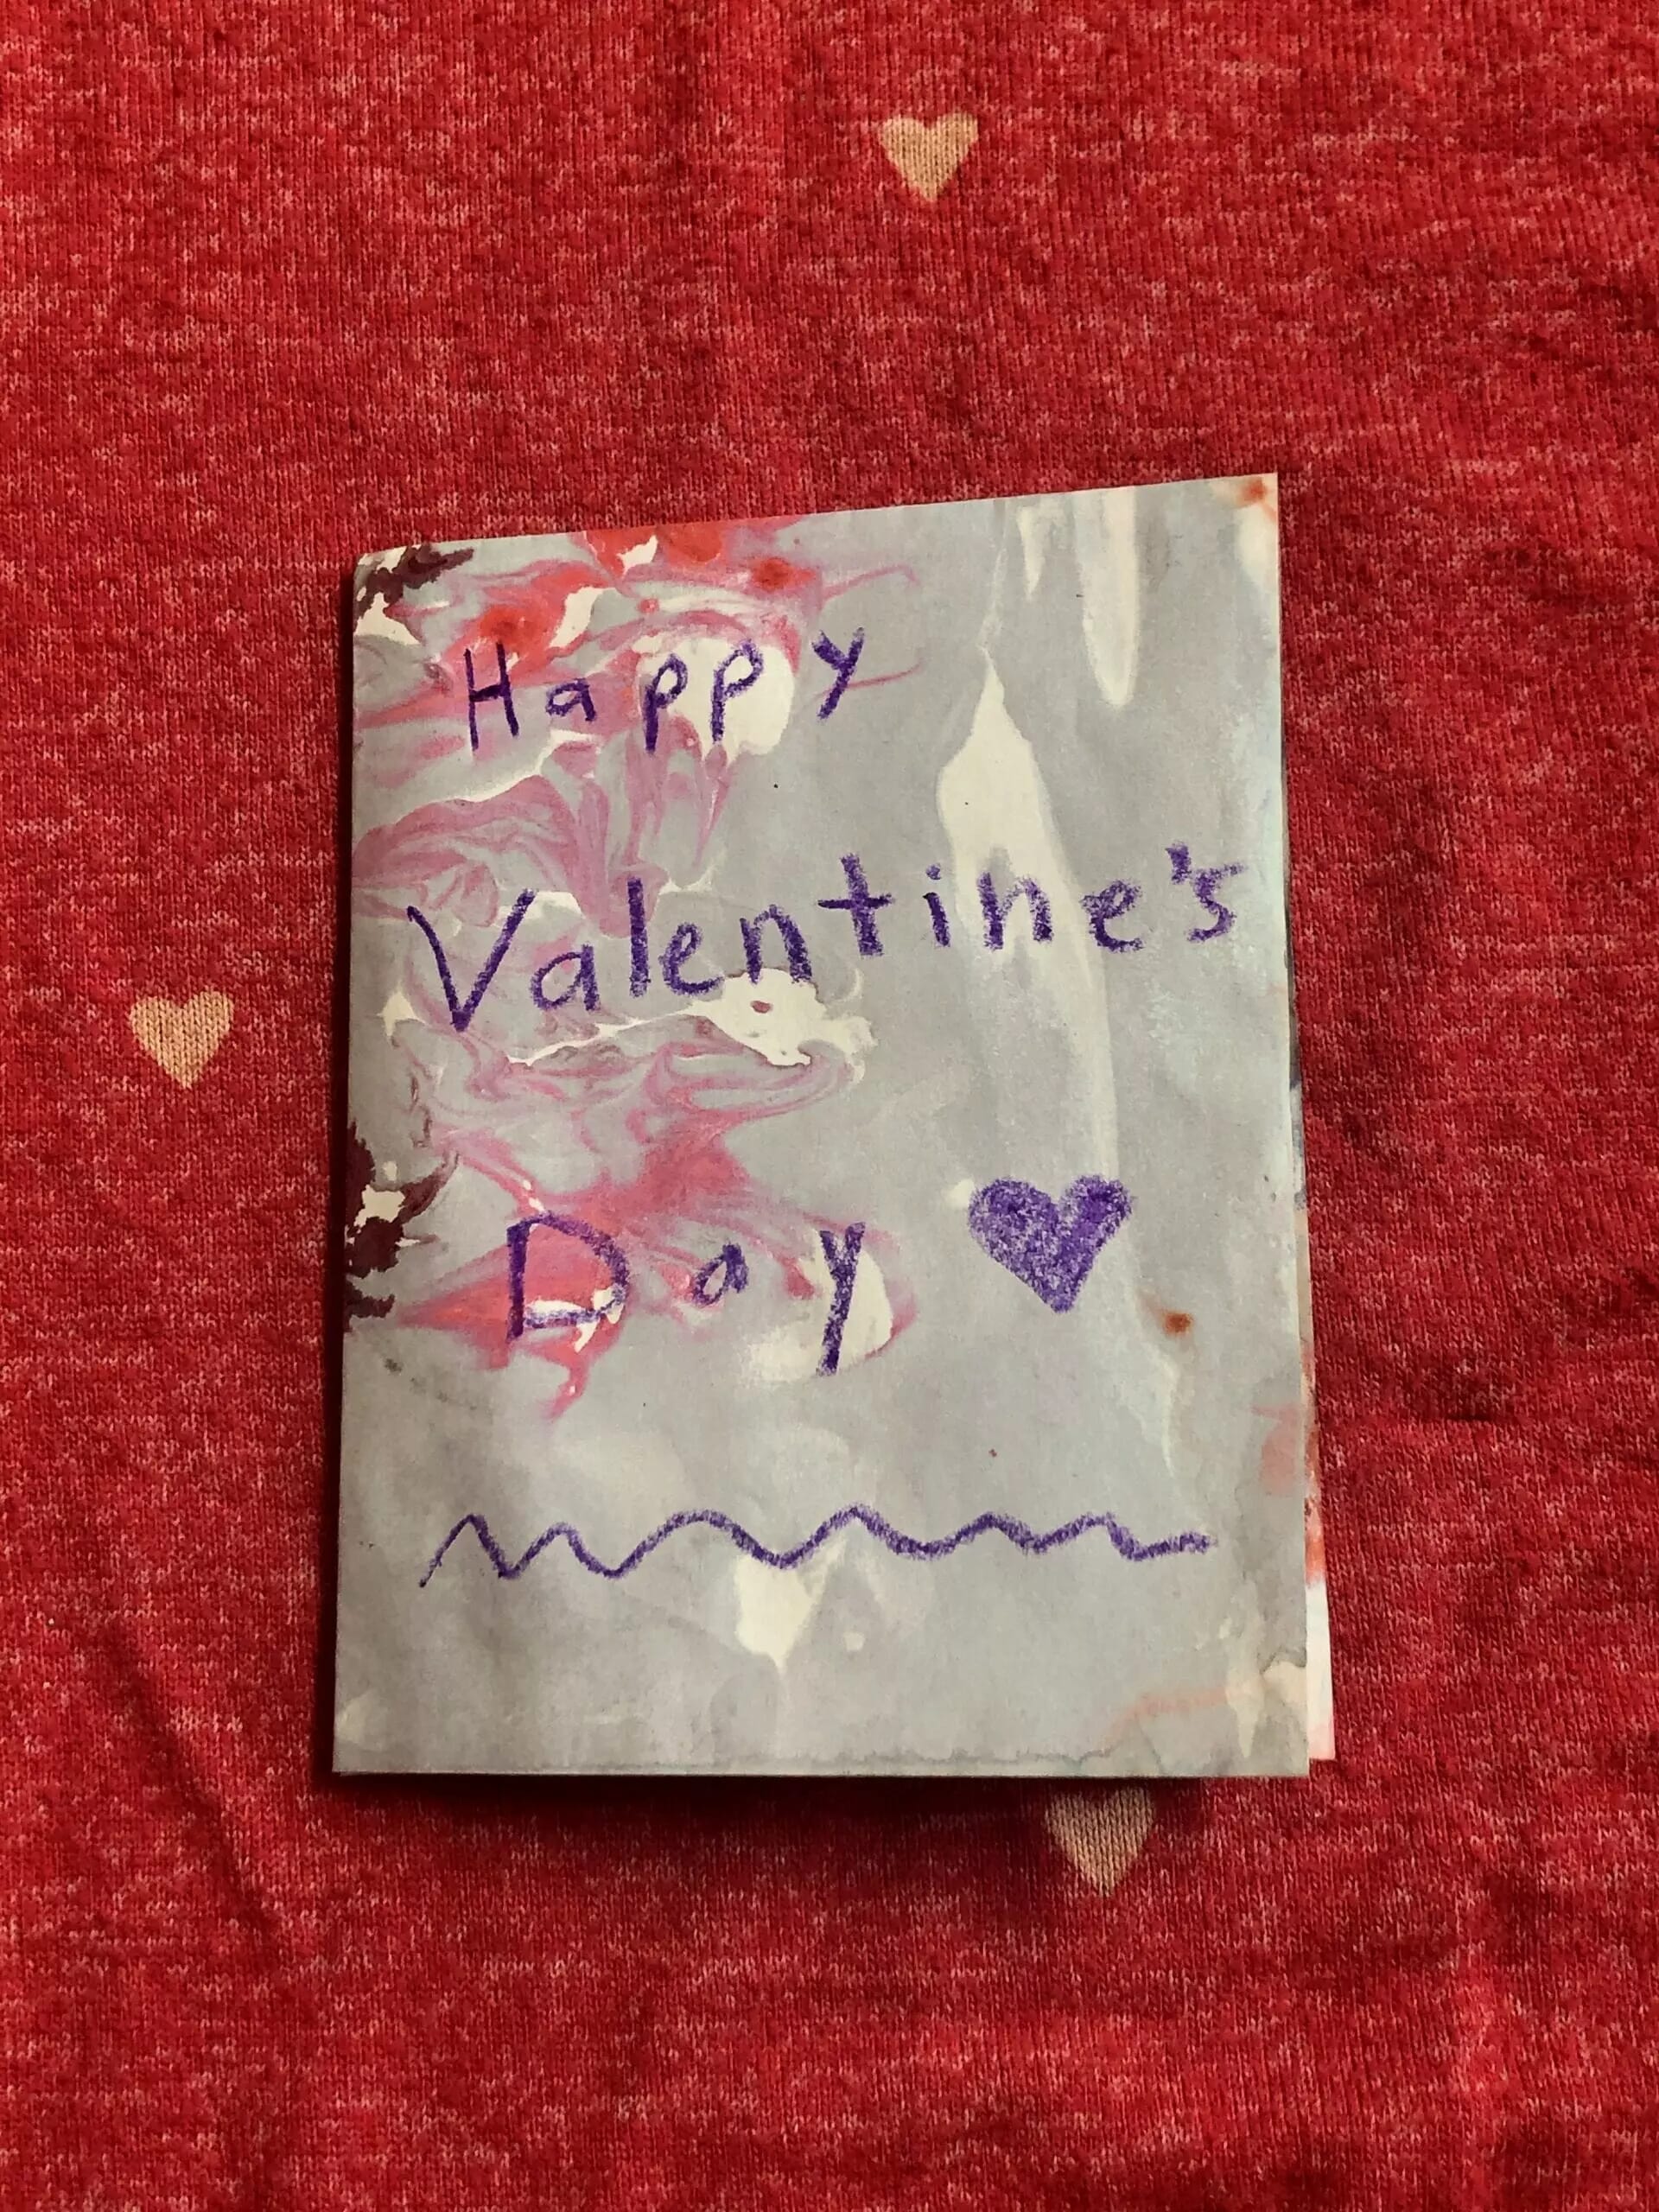 How to Make Fancy Paper for Your Own Valentine's Day Cards